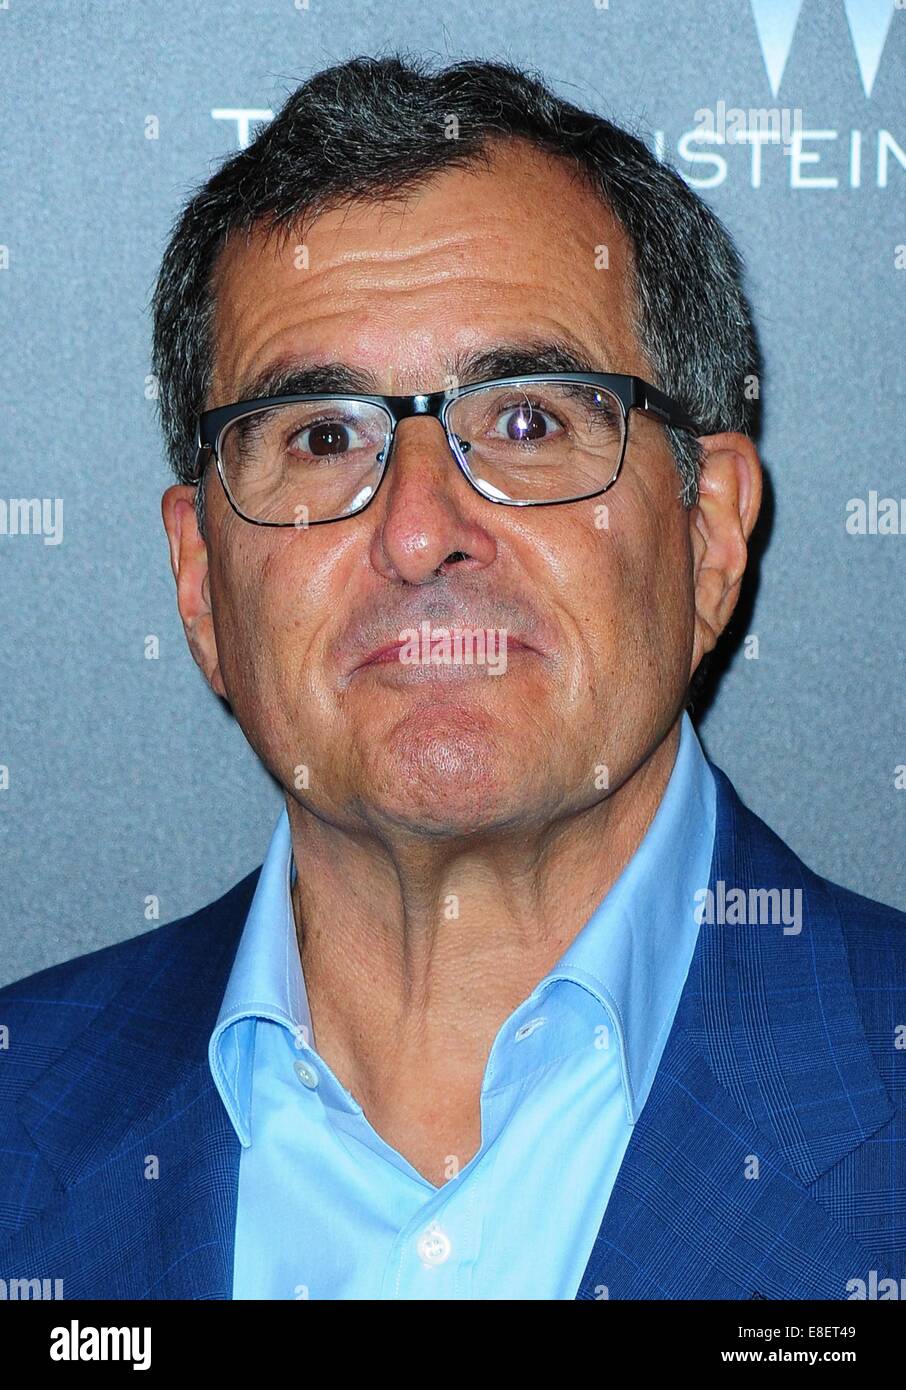 New York, NY, USA. 6th Oct, 2014. Peter Chernin at arrivals for ST. VINCENT Premiere, Ziegfeld Theatre, New York, NY October 6, 2014. Credit:  Gregorio T. Binuya/Everett Collection/Alamy Live News Stock Photo